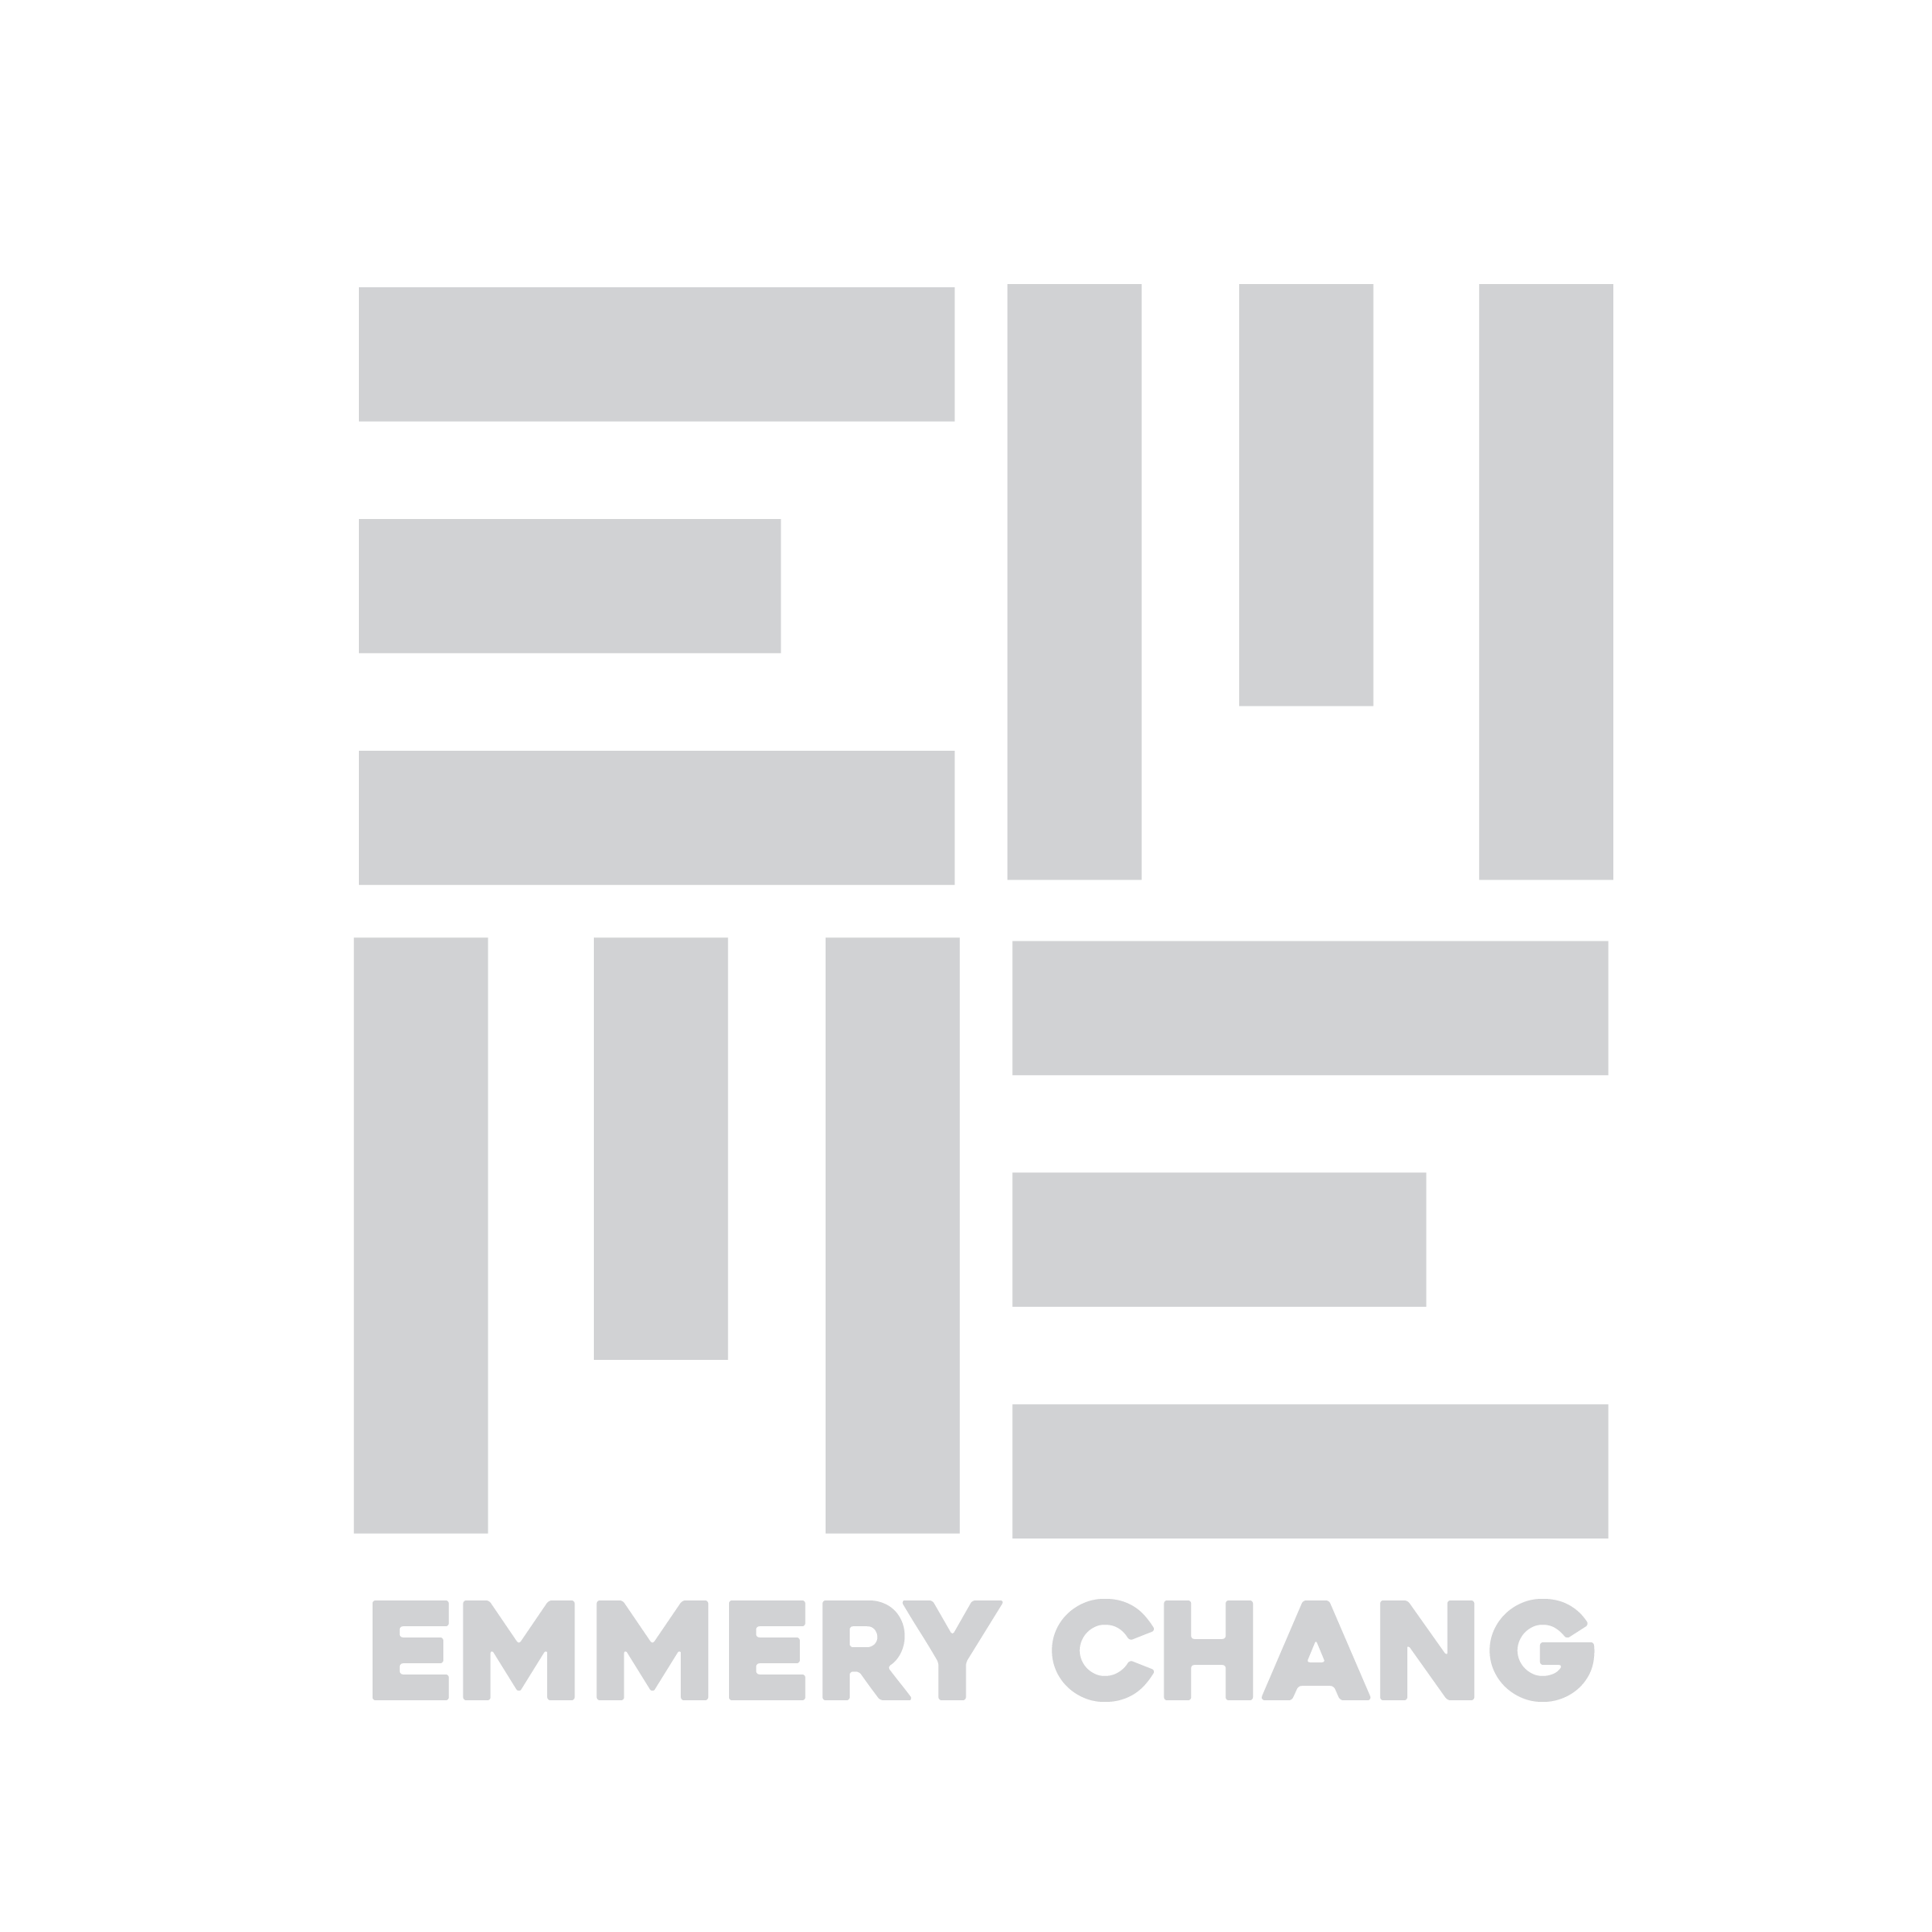 Emmery Chang